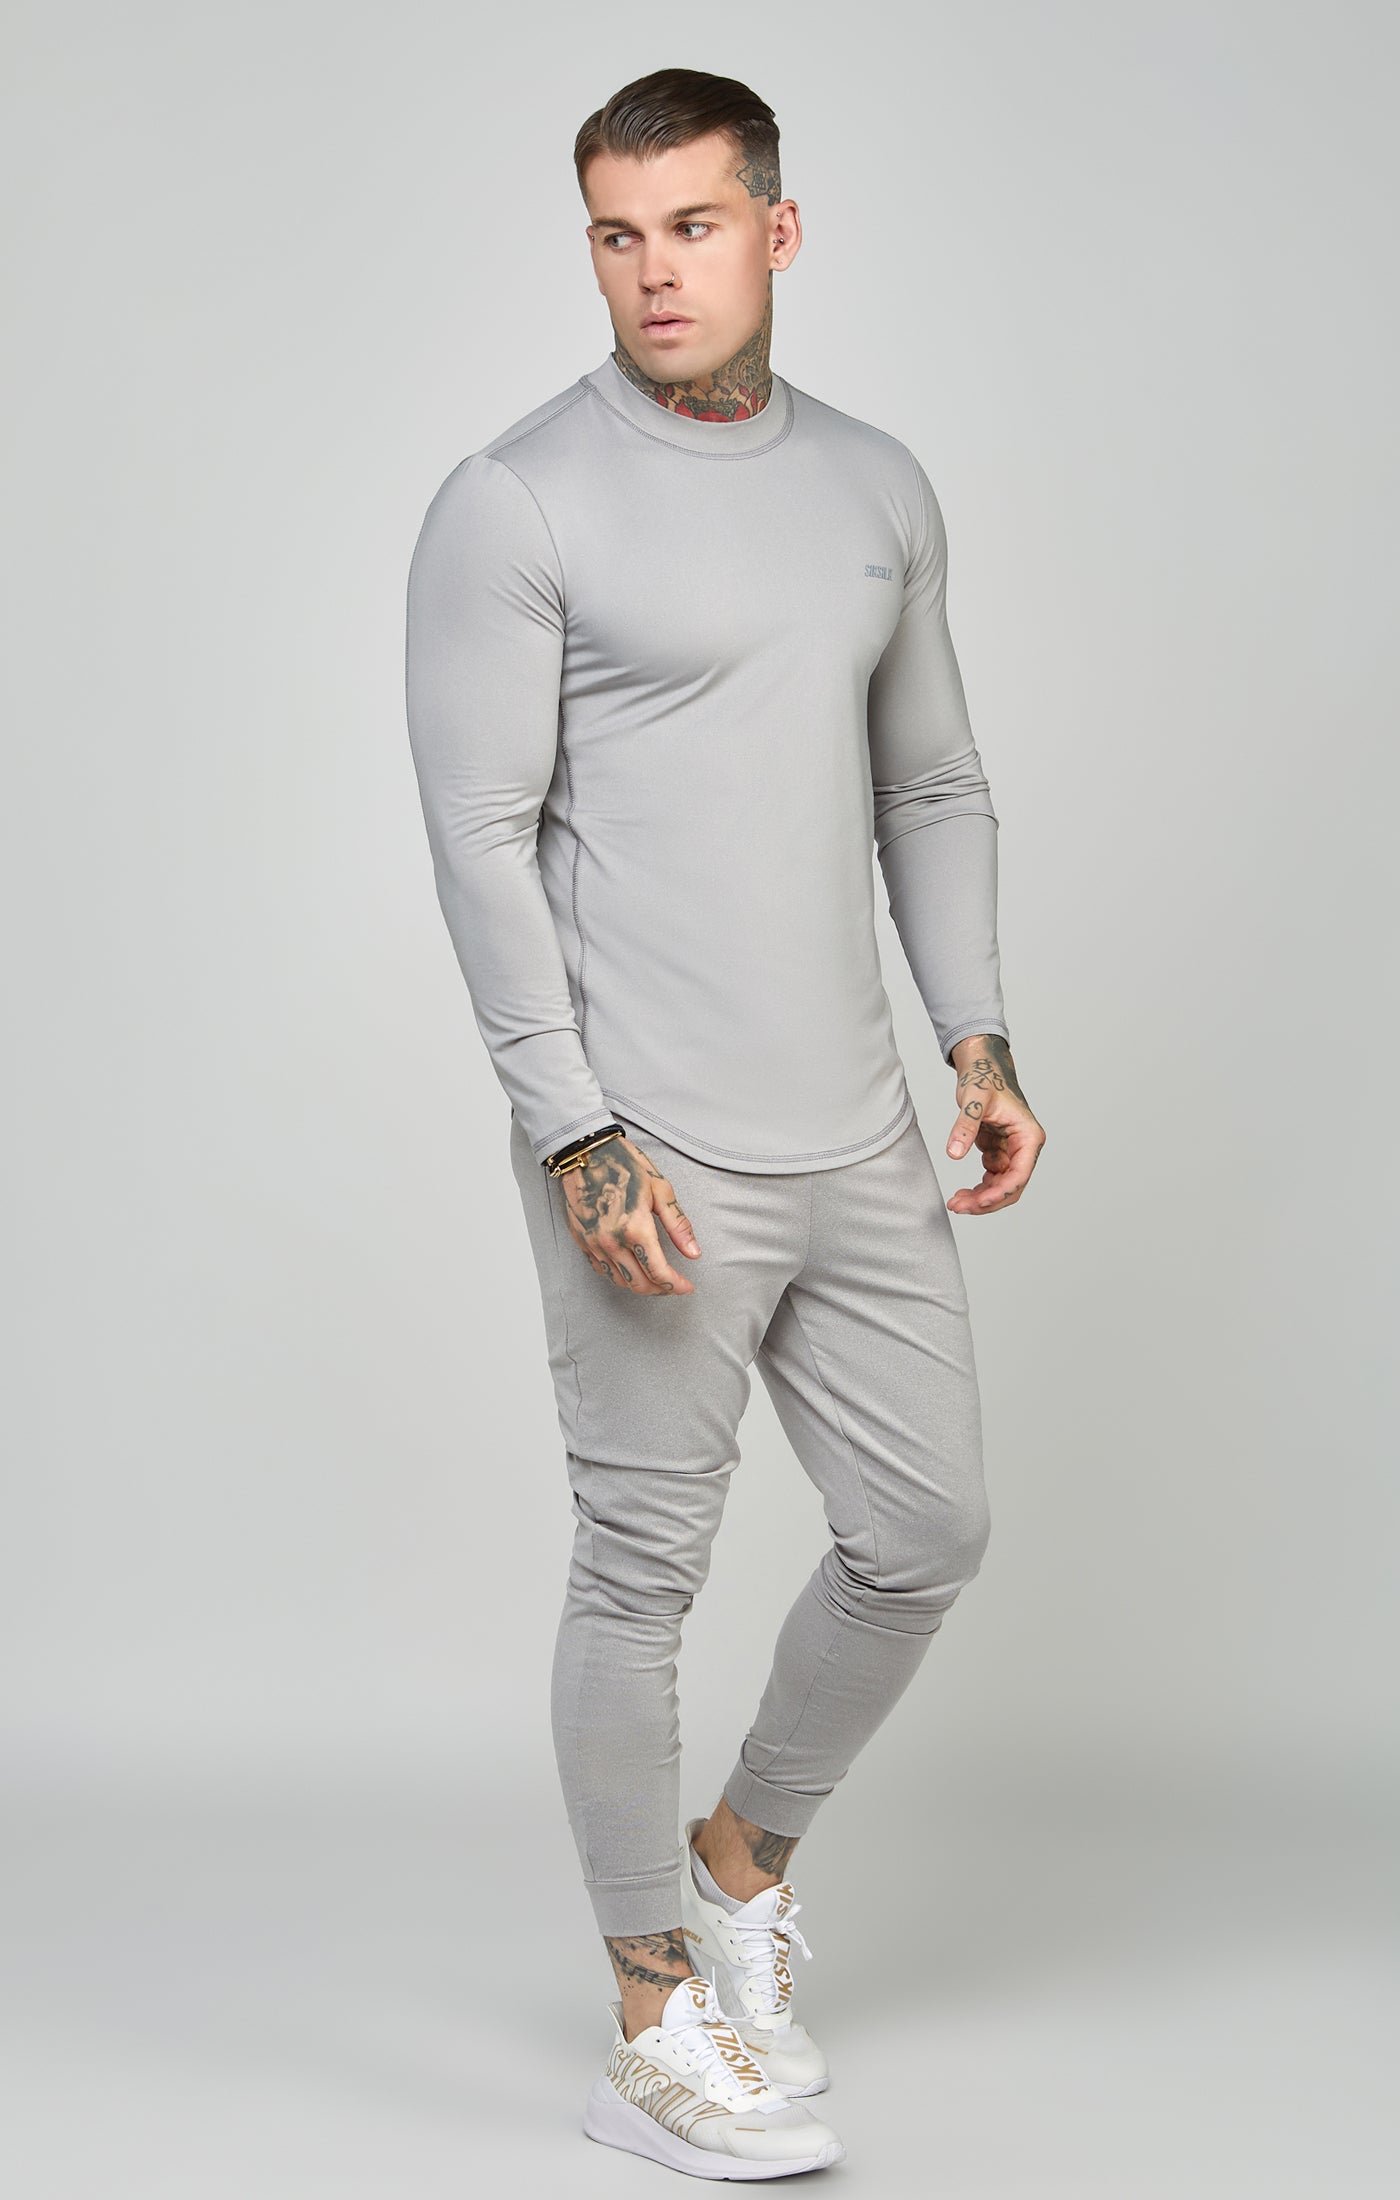 Load image into Gallery viewer, Grey Sports Muscle Fit Long Sleeve Top (1)